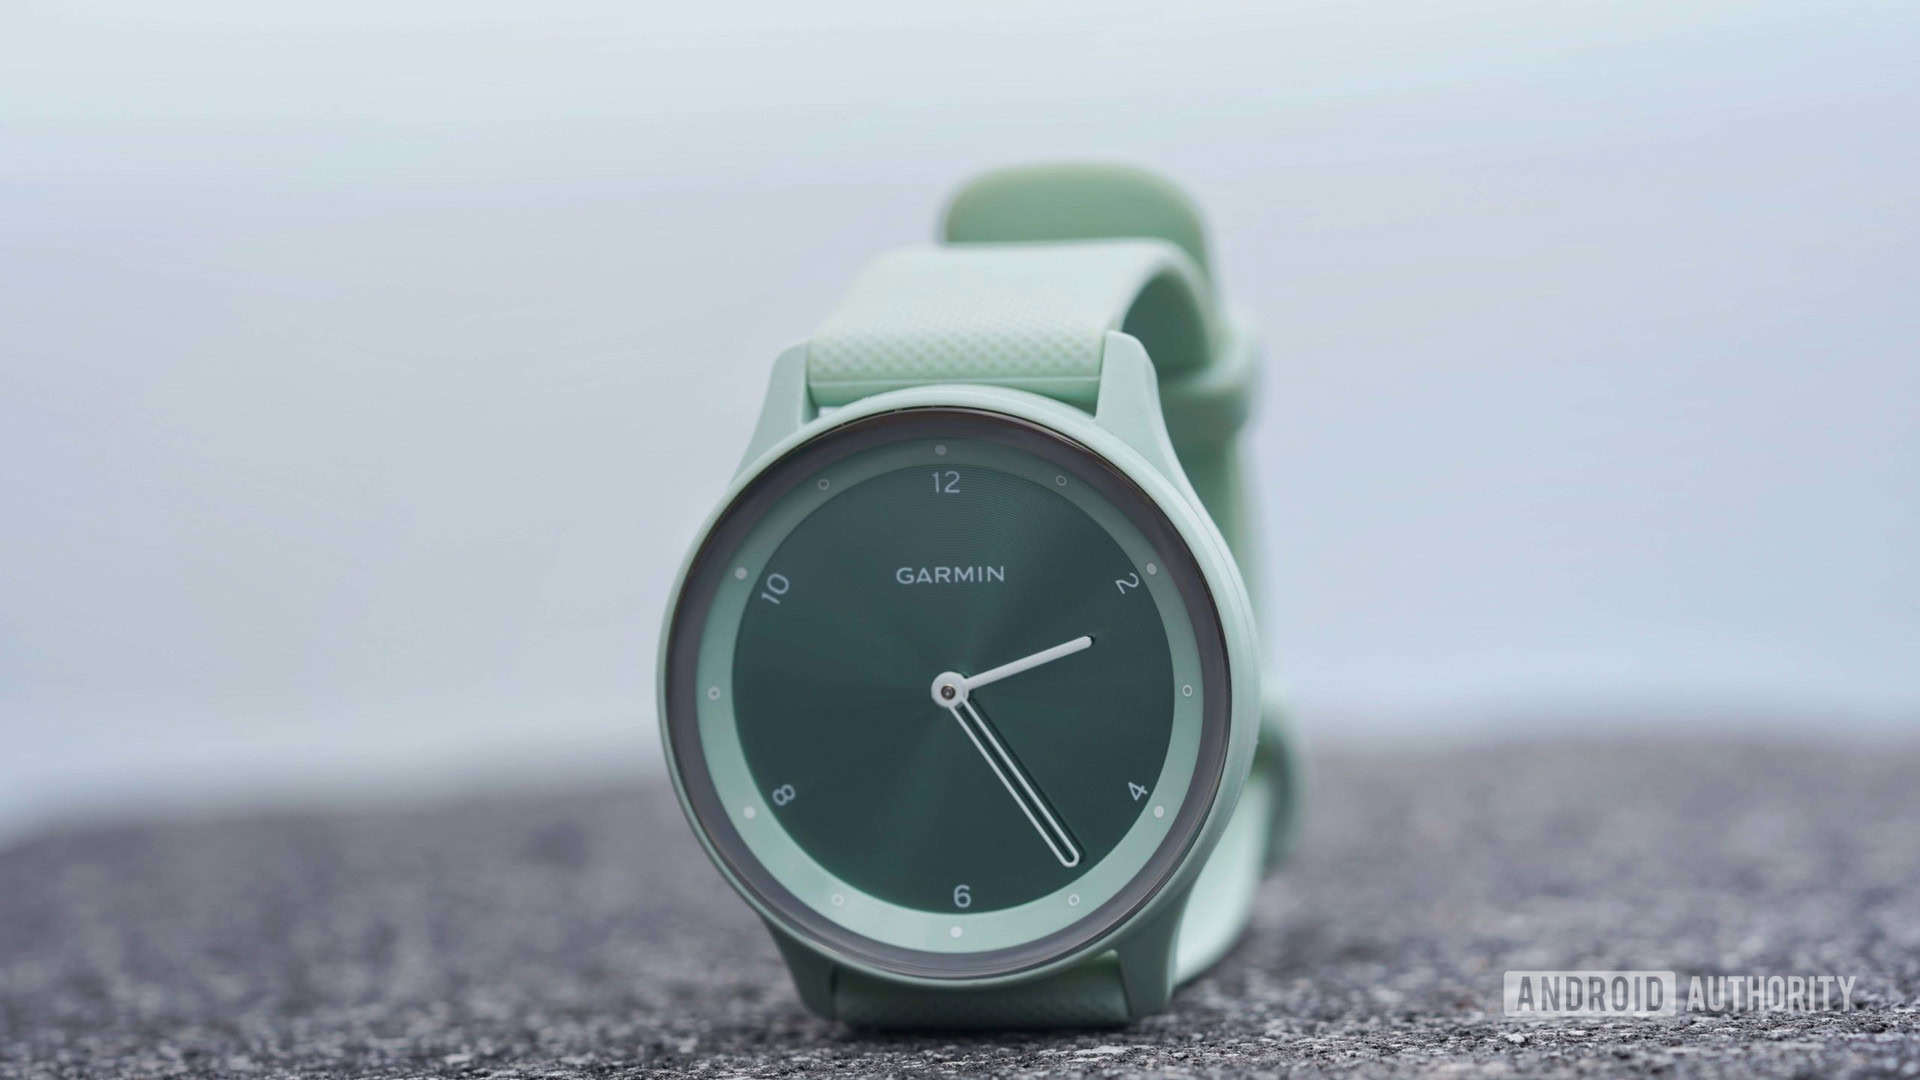 Garmin Sport review: The intersection of style and substance